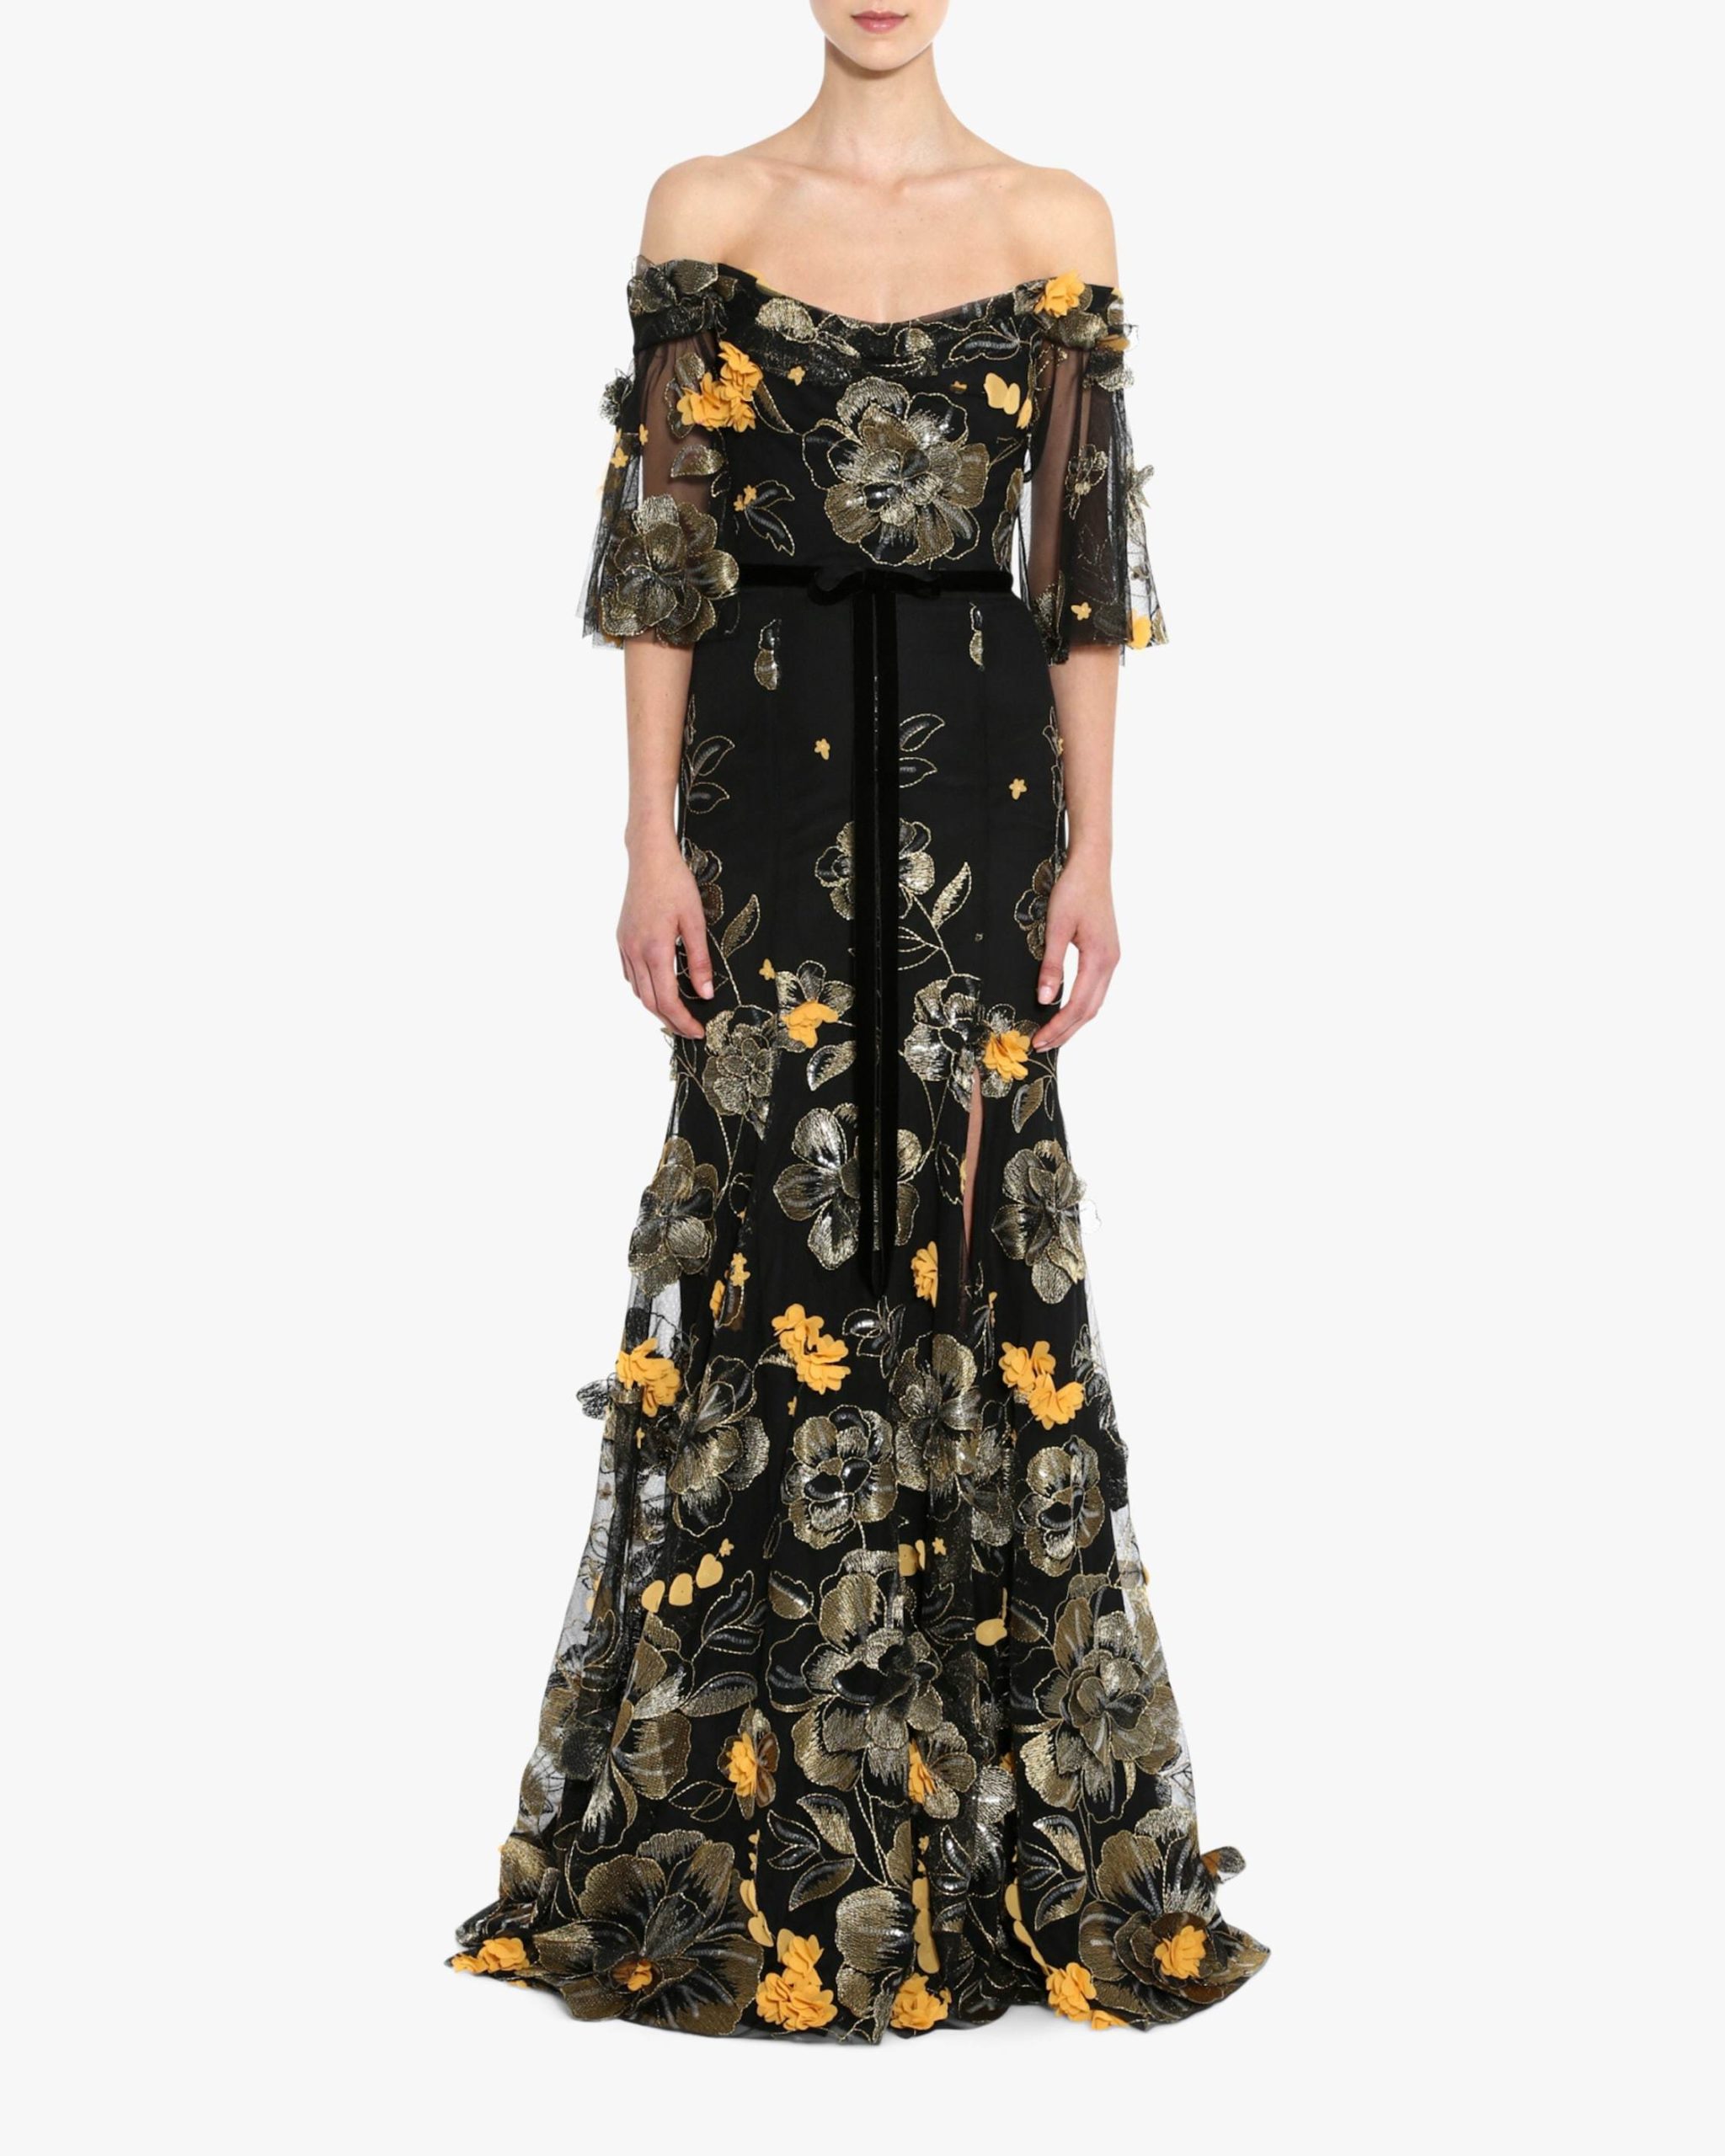 orange florals on a black dress is one of the most unique fall wedding ideas